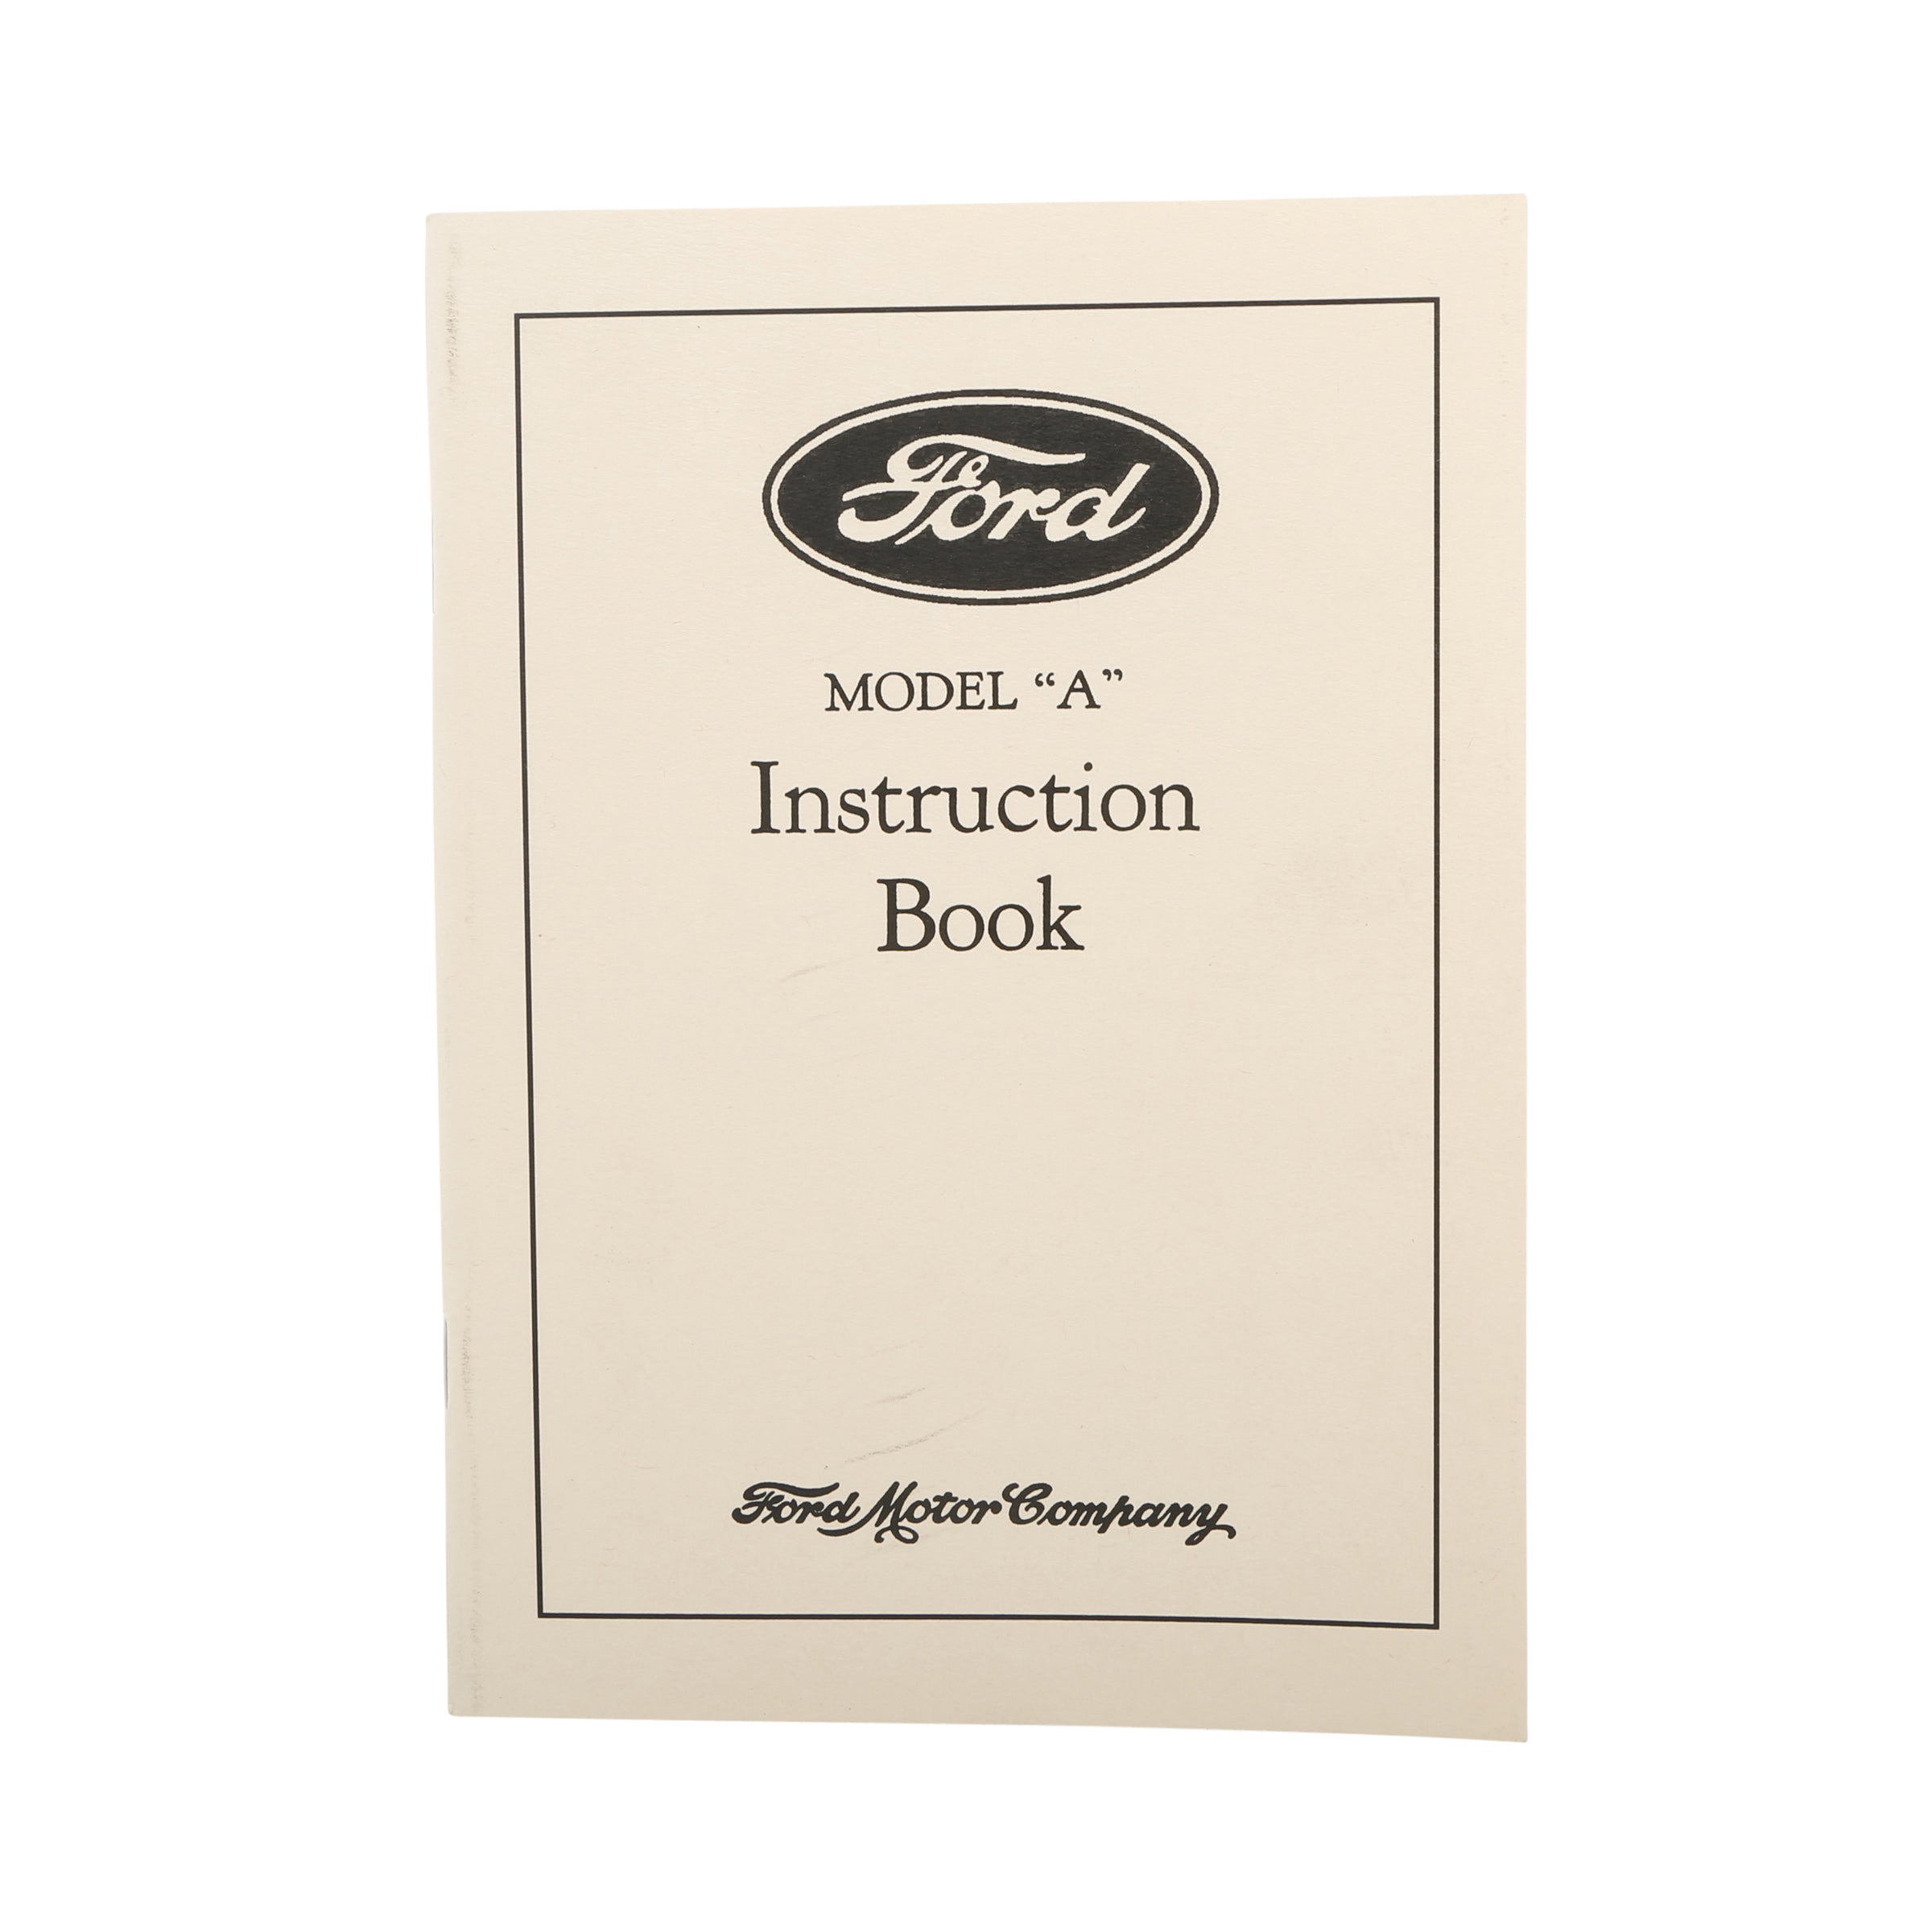 Model A Ford Instruction Book • 1928